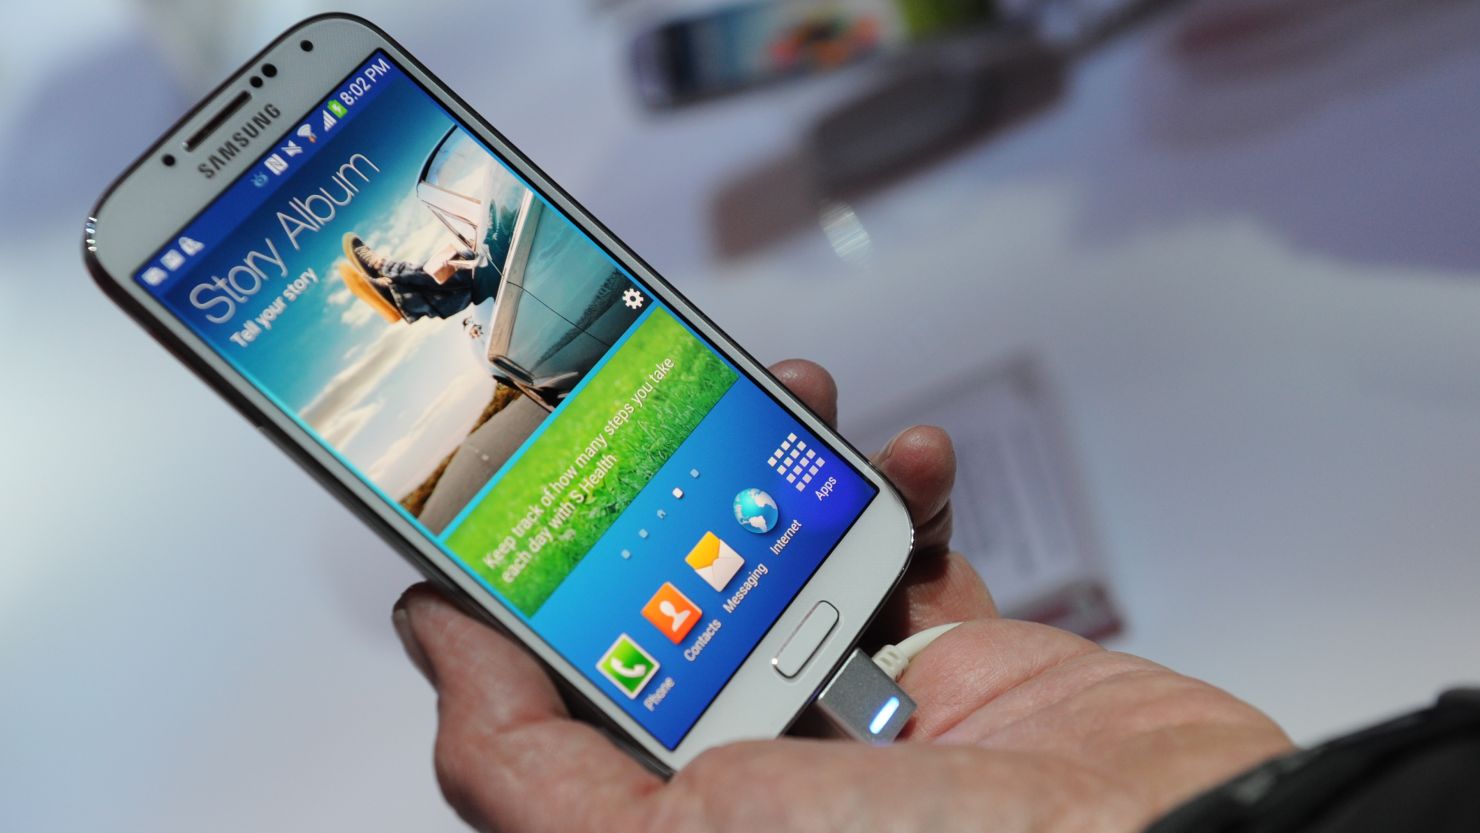 Consumer Reports gave top marks to Samsung's Galaxy S4 phone.